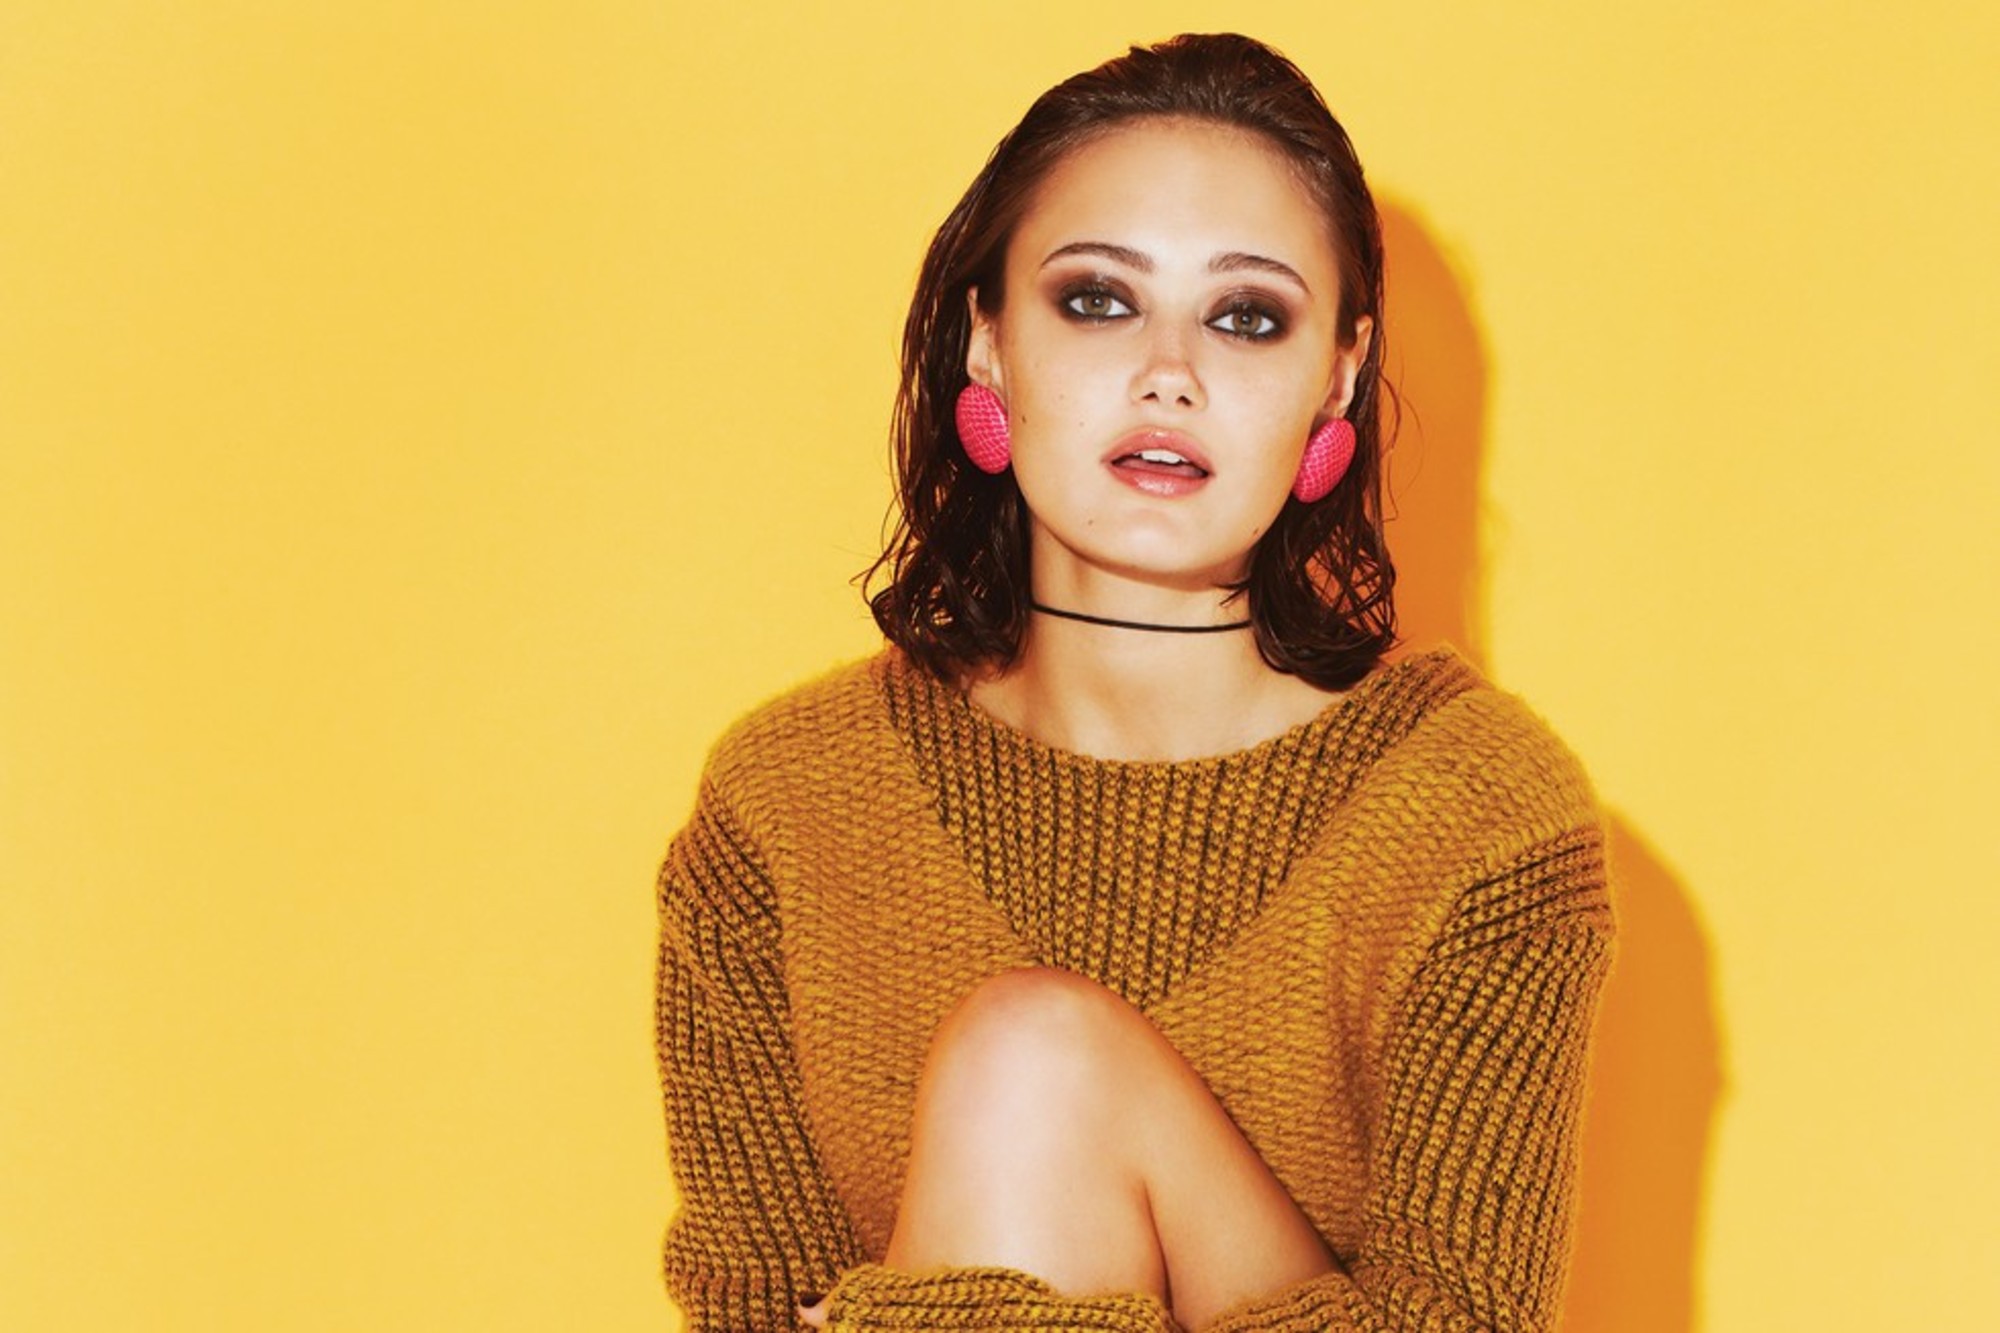 Ella Purnell Tackles Wild Squirrels in New Comedy-Horror 'The Scurry' After 'Fallout' Success